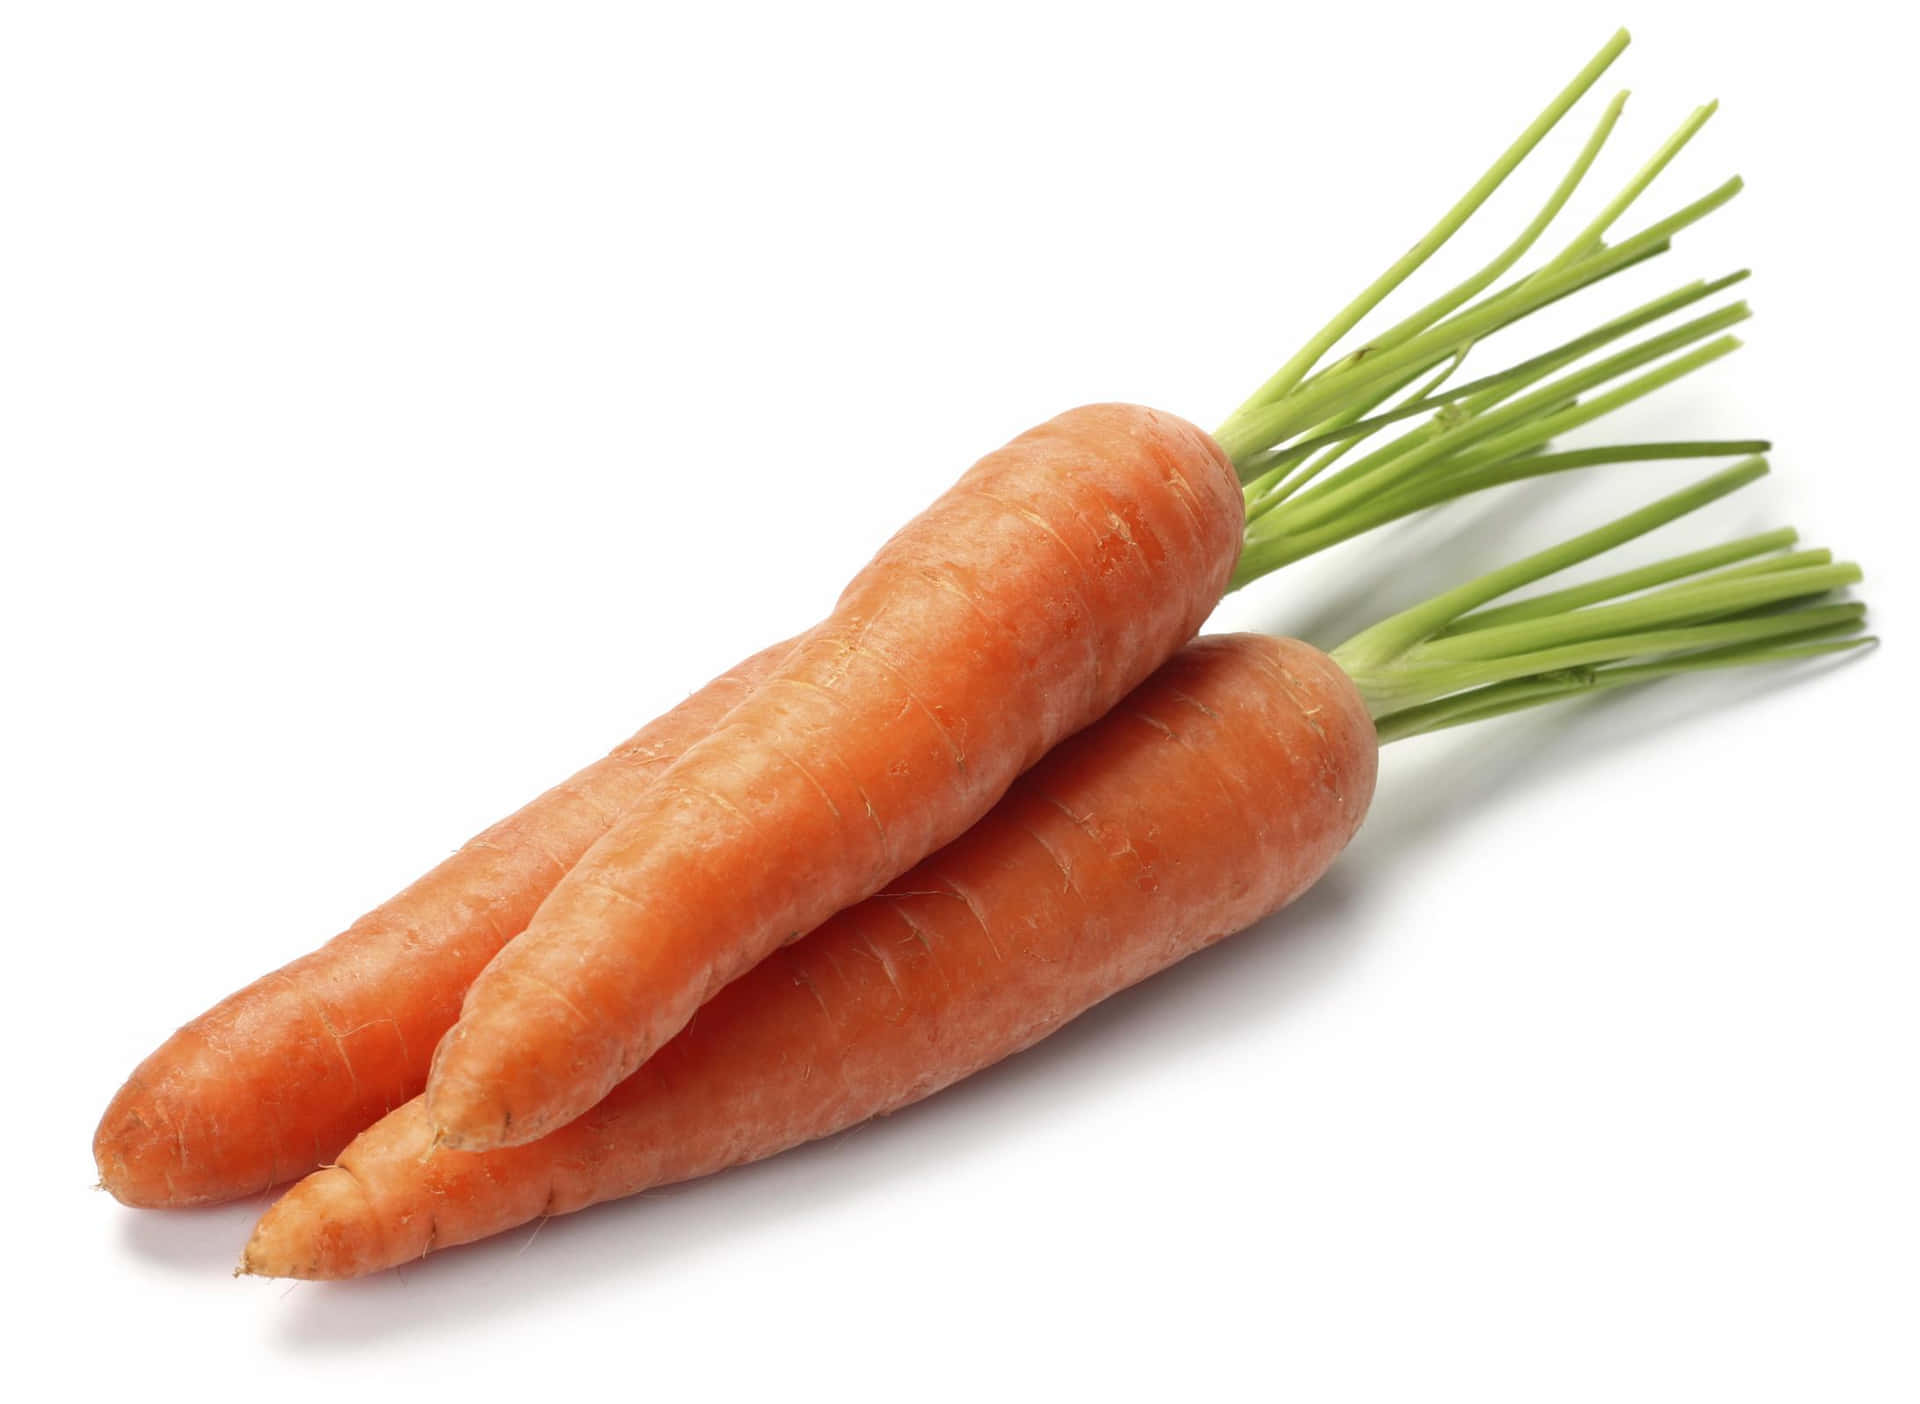 Two Carrots On A White Background